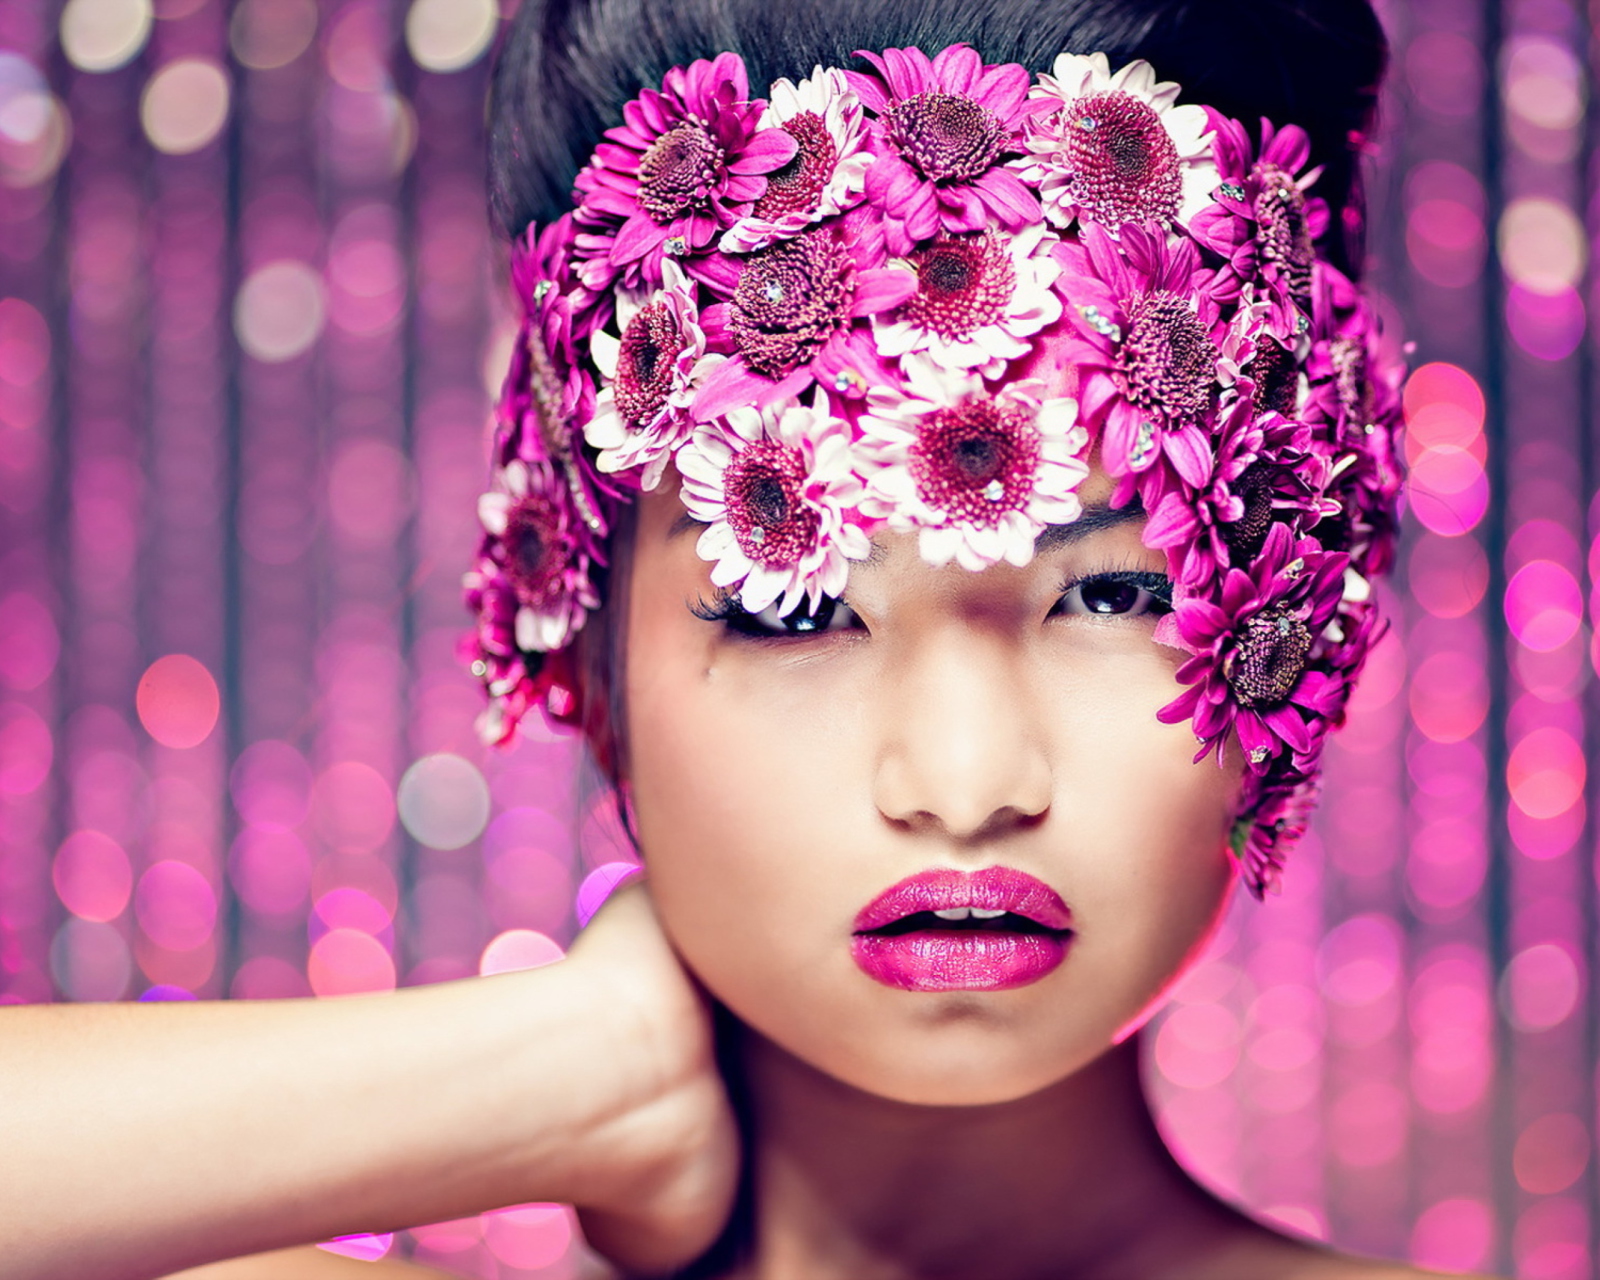 Asian Fashion Model With Pink Flower Wreath wallpaper 1600x1280